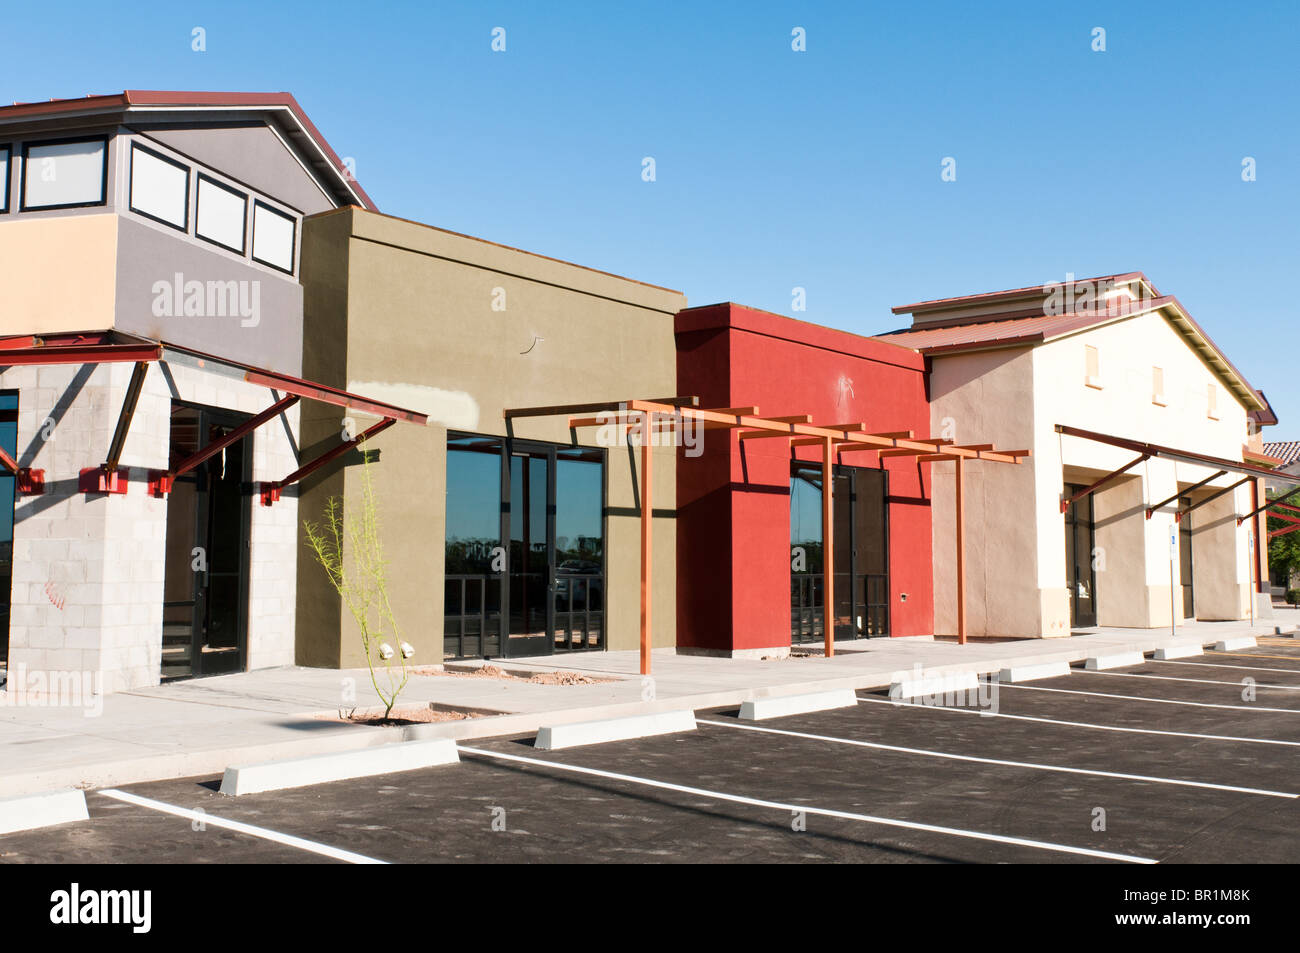 A new retail strip mall is nearing completion in Arizona. Stock Photo